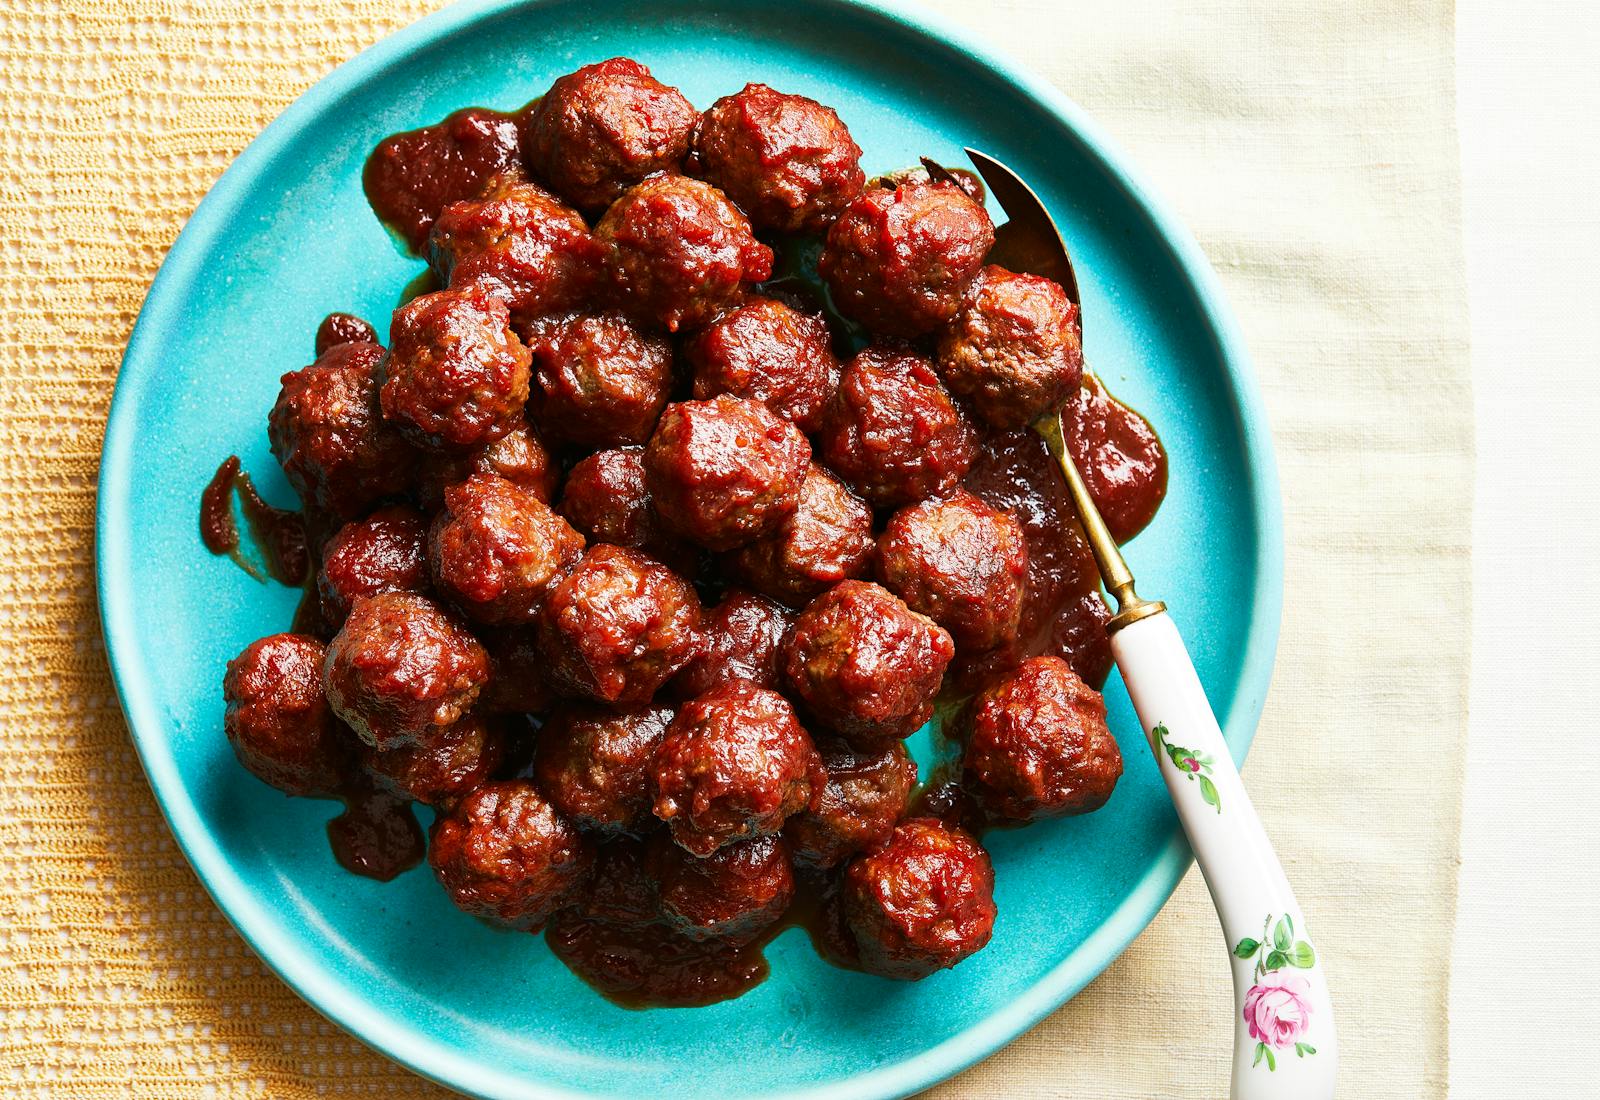 Meatballs stacked on a turquoise plate with a serving fork on the side atop yellow tablecloth.